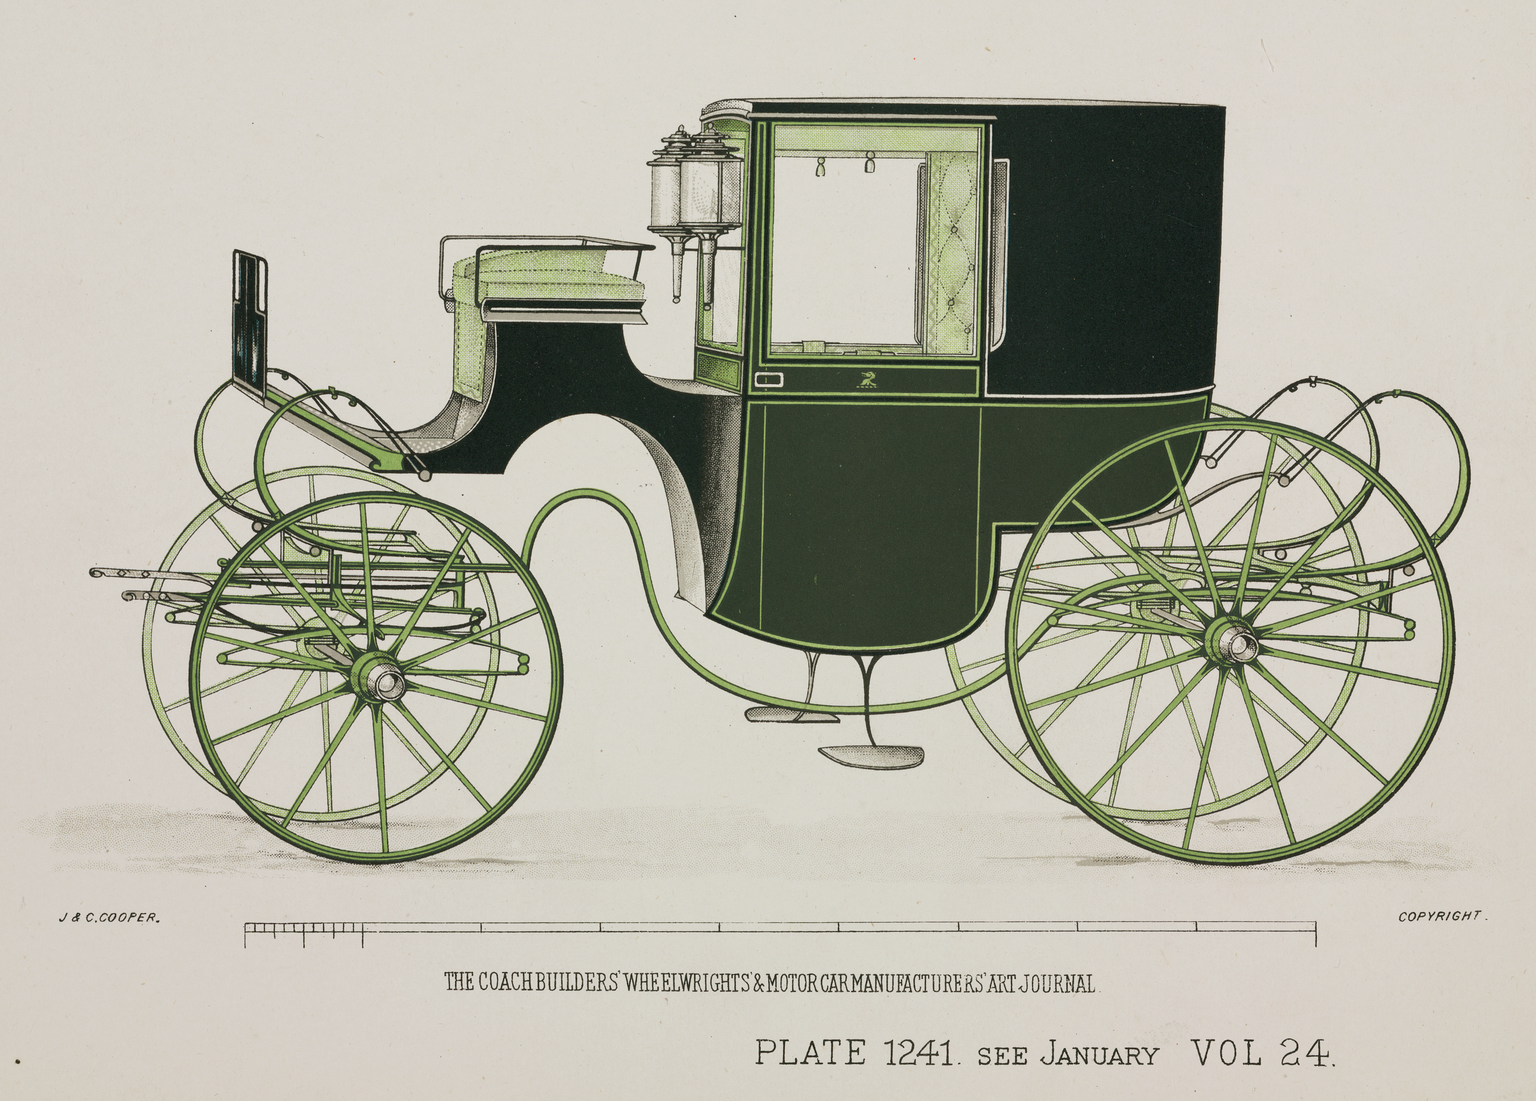 Print of the Brougham Carriage c.1903 from Coachbuilders' & Wheelwrights' Art Journal, January, vol.24